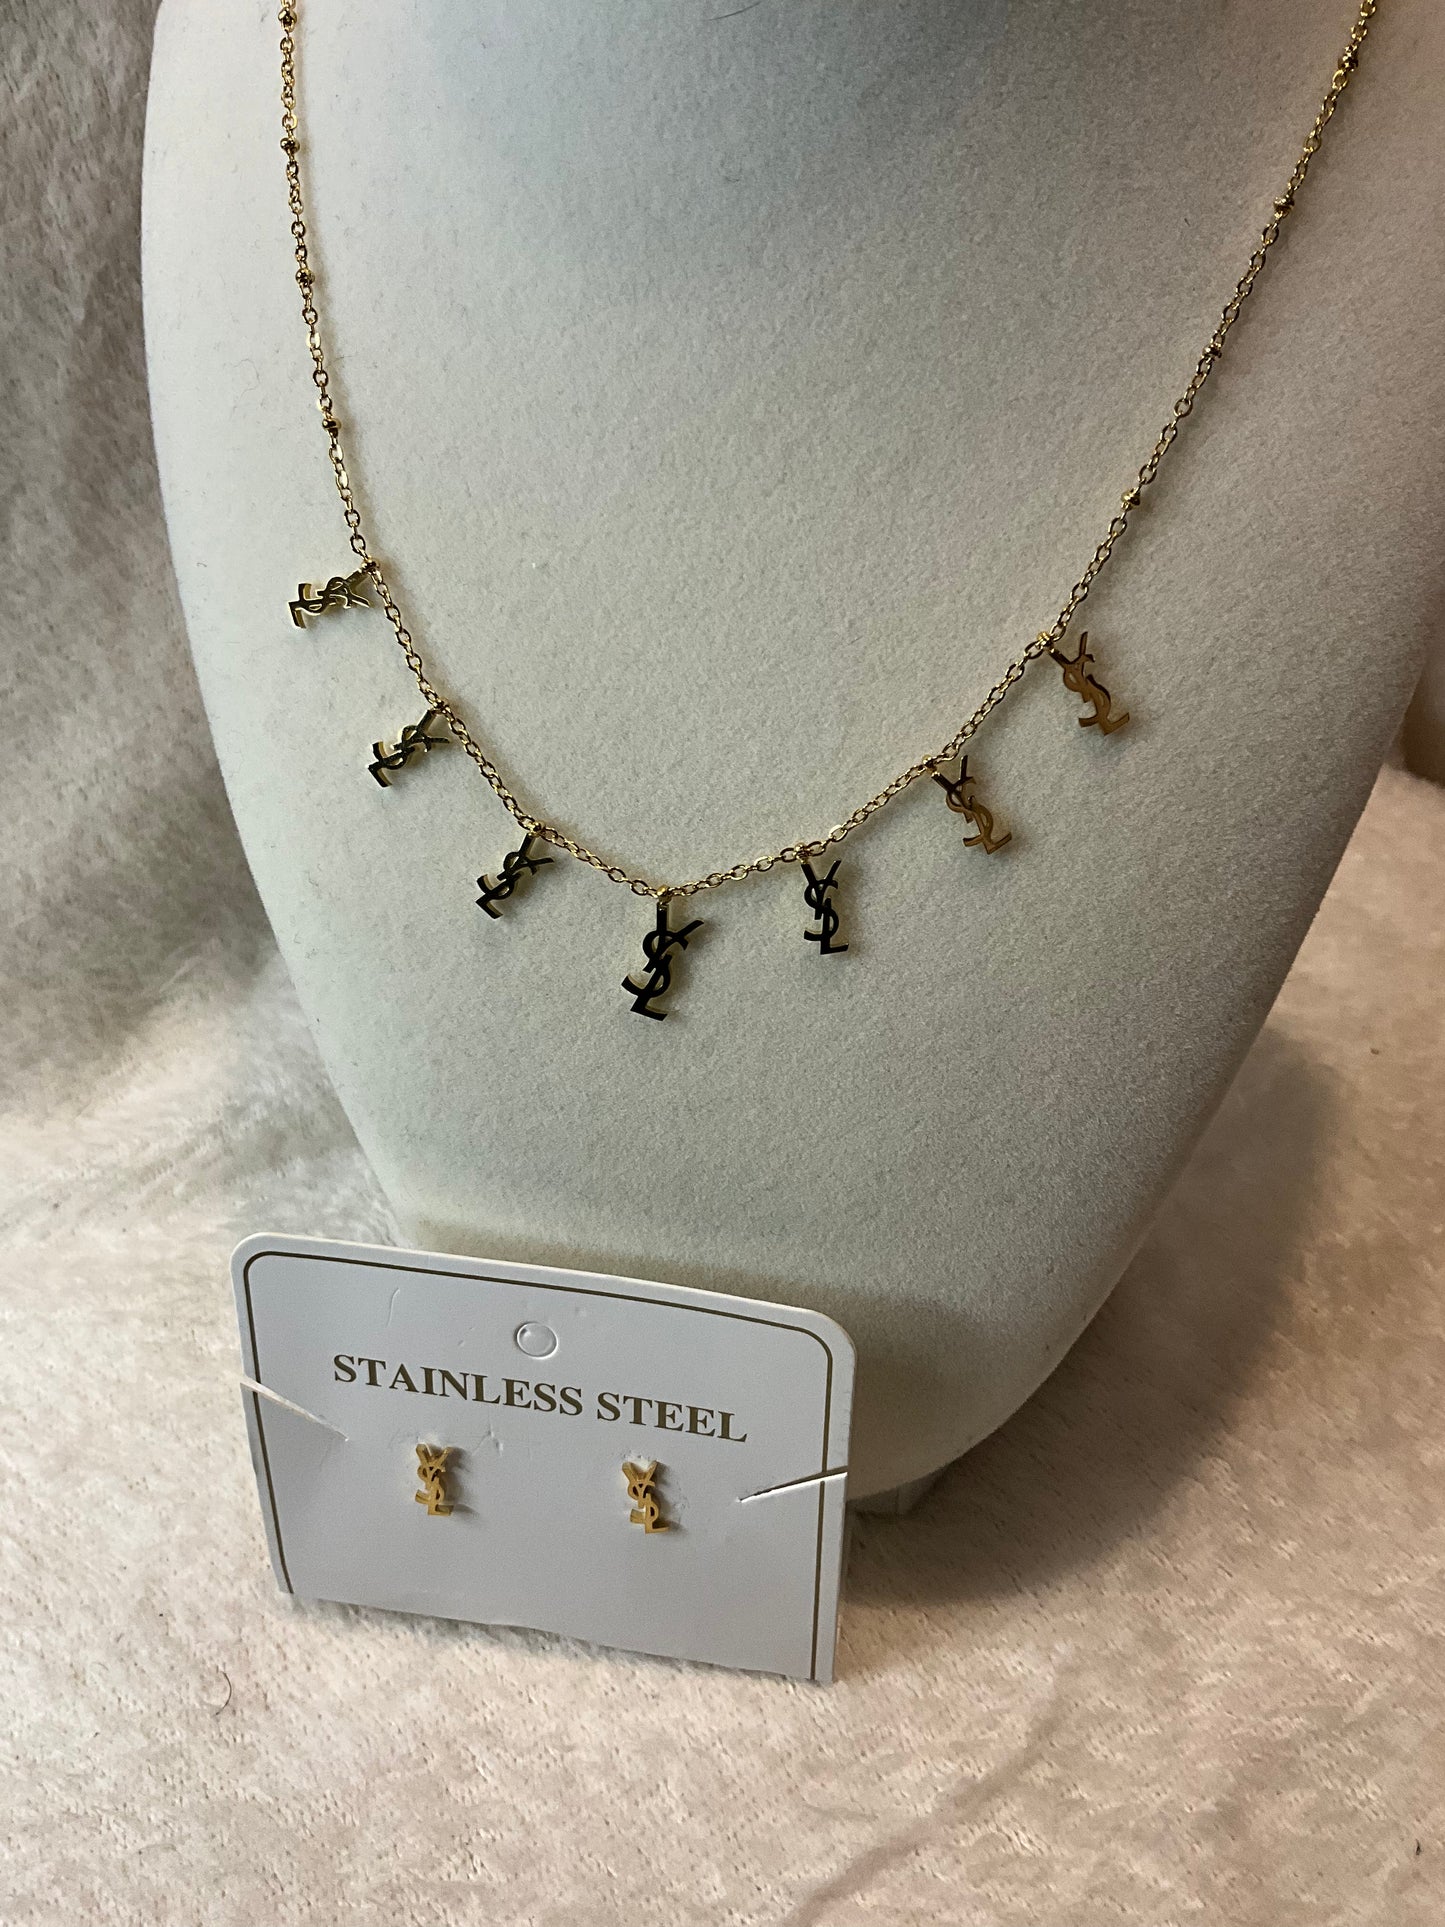 YL Inspired Designer Necklace with Stud earrings